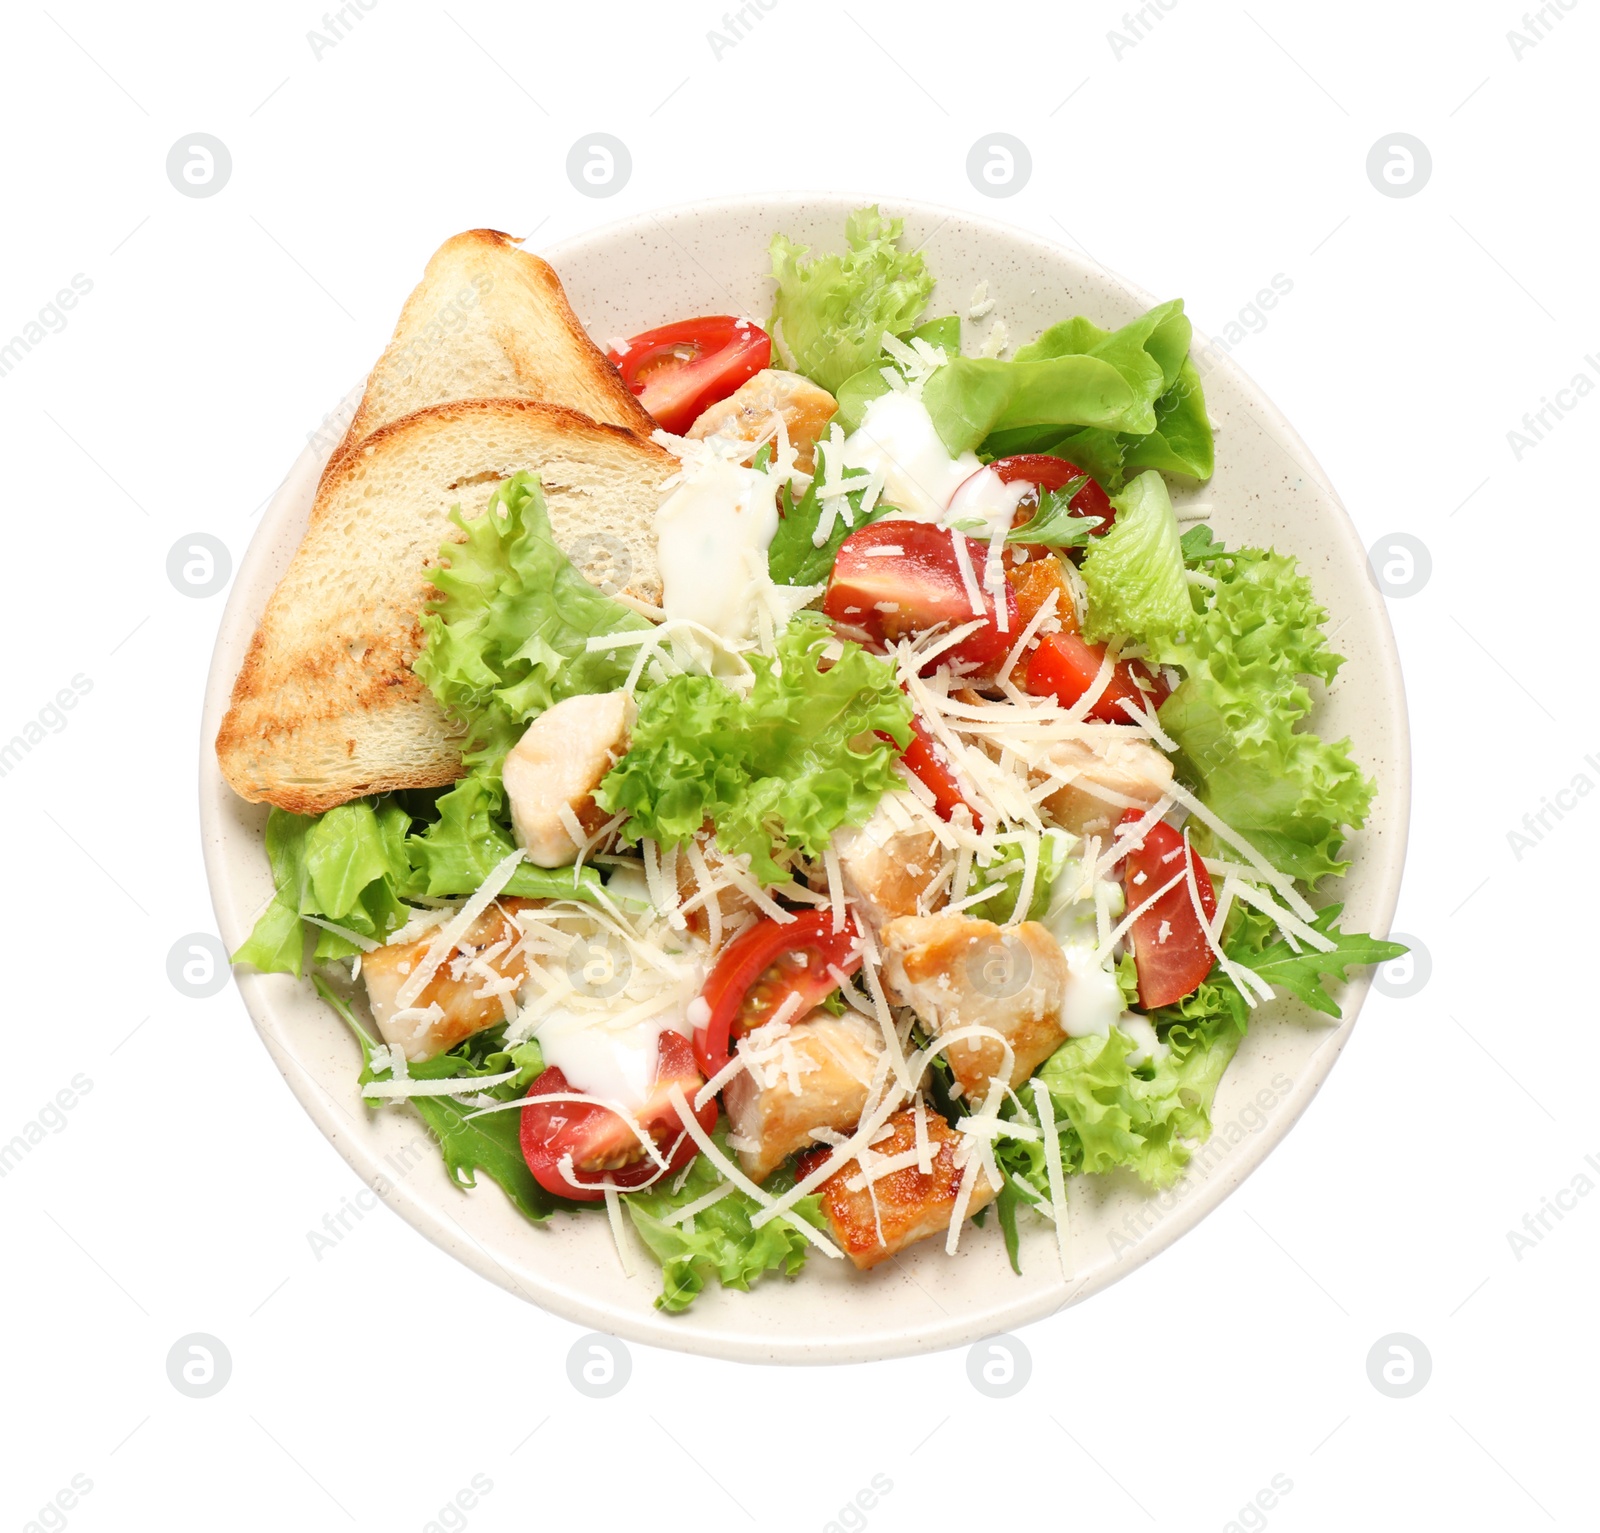 Image of Delicious fresh Caesar salad on white background, top view